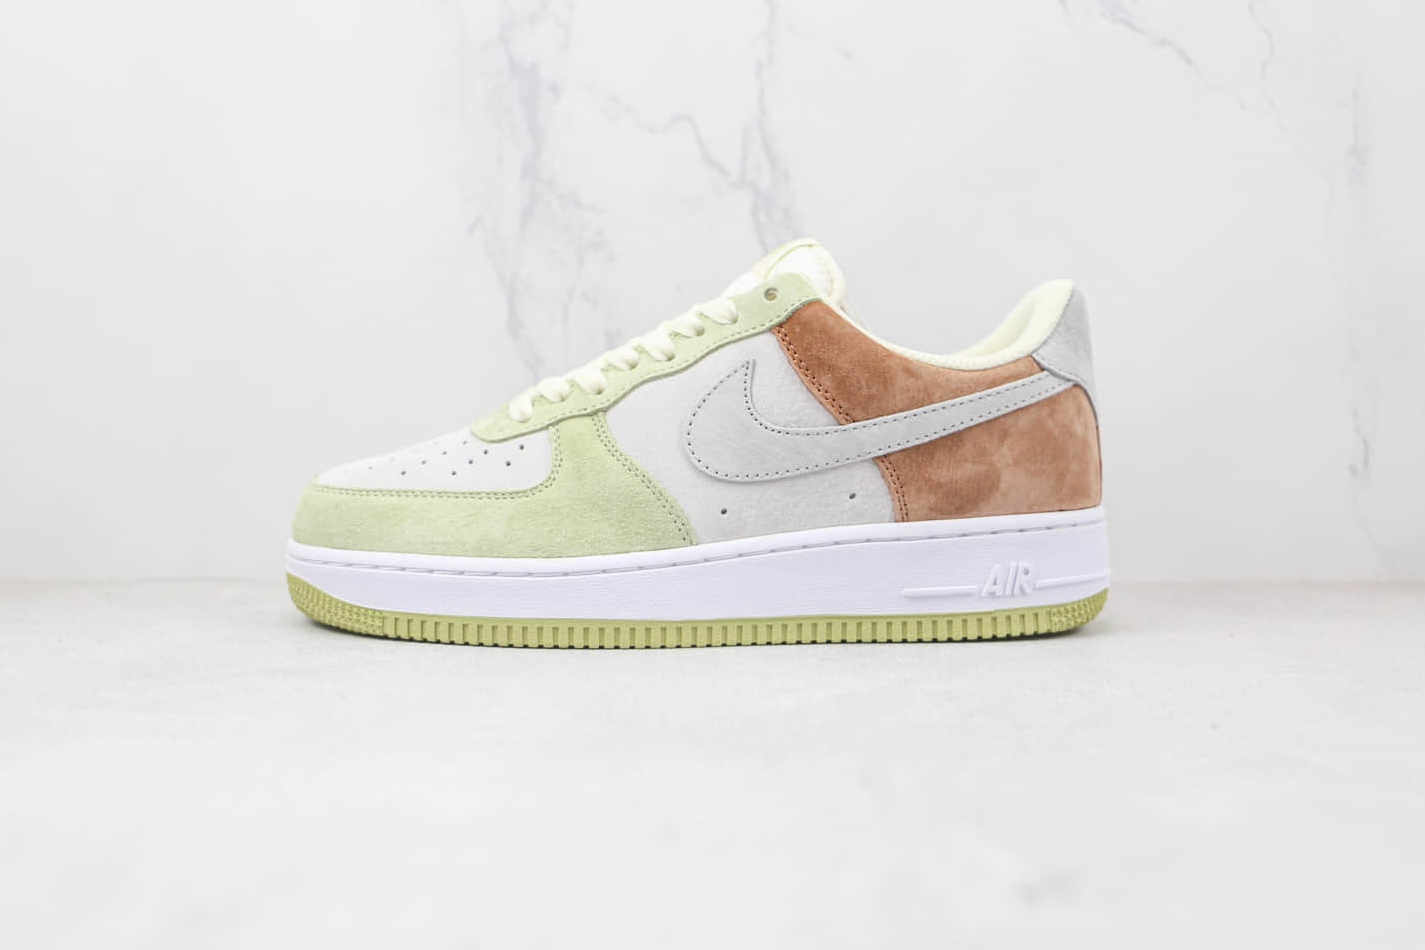 Nike Air Force 1 07 Low White Light Green Grey Brown DL5819-618 - Trendy and Stylish Sneakers